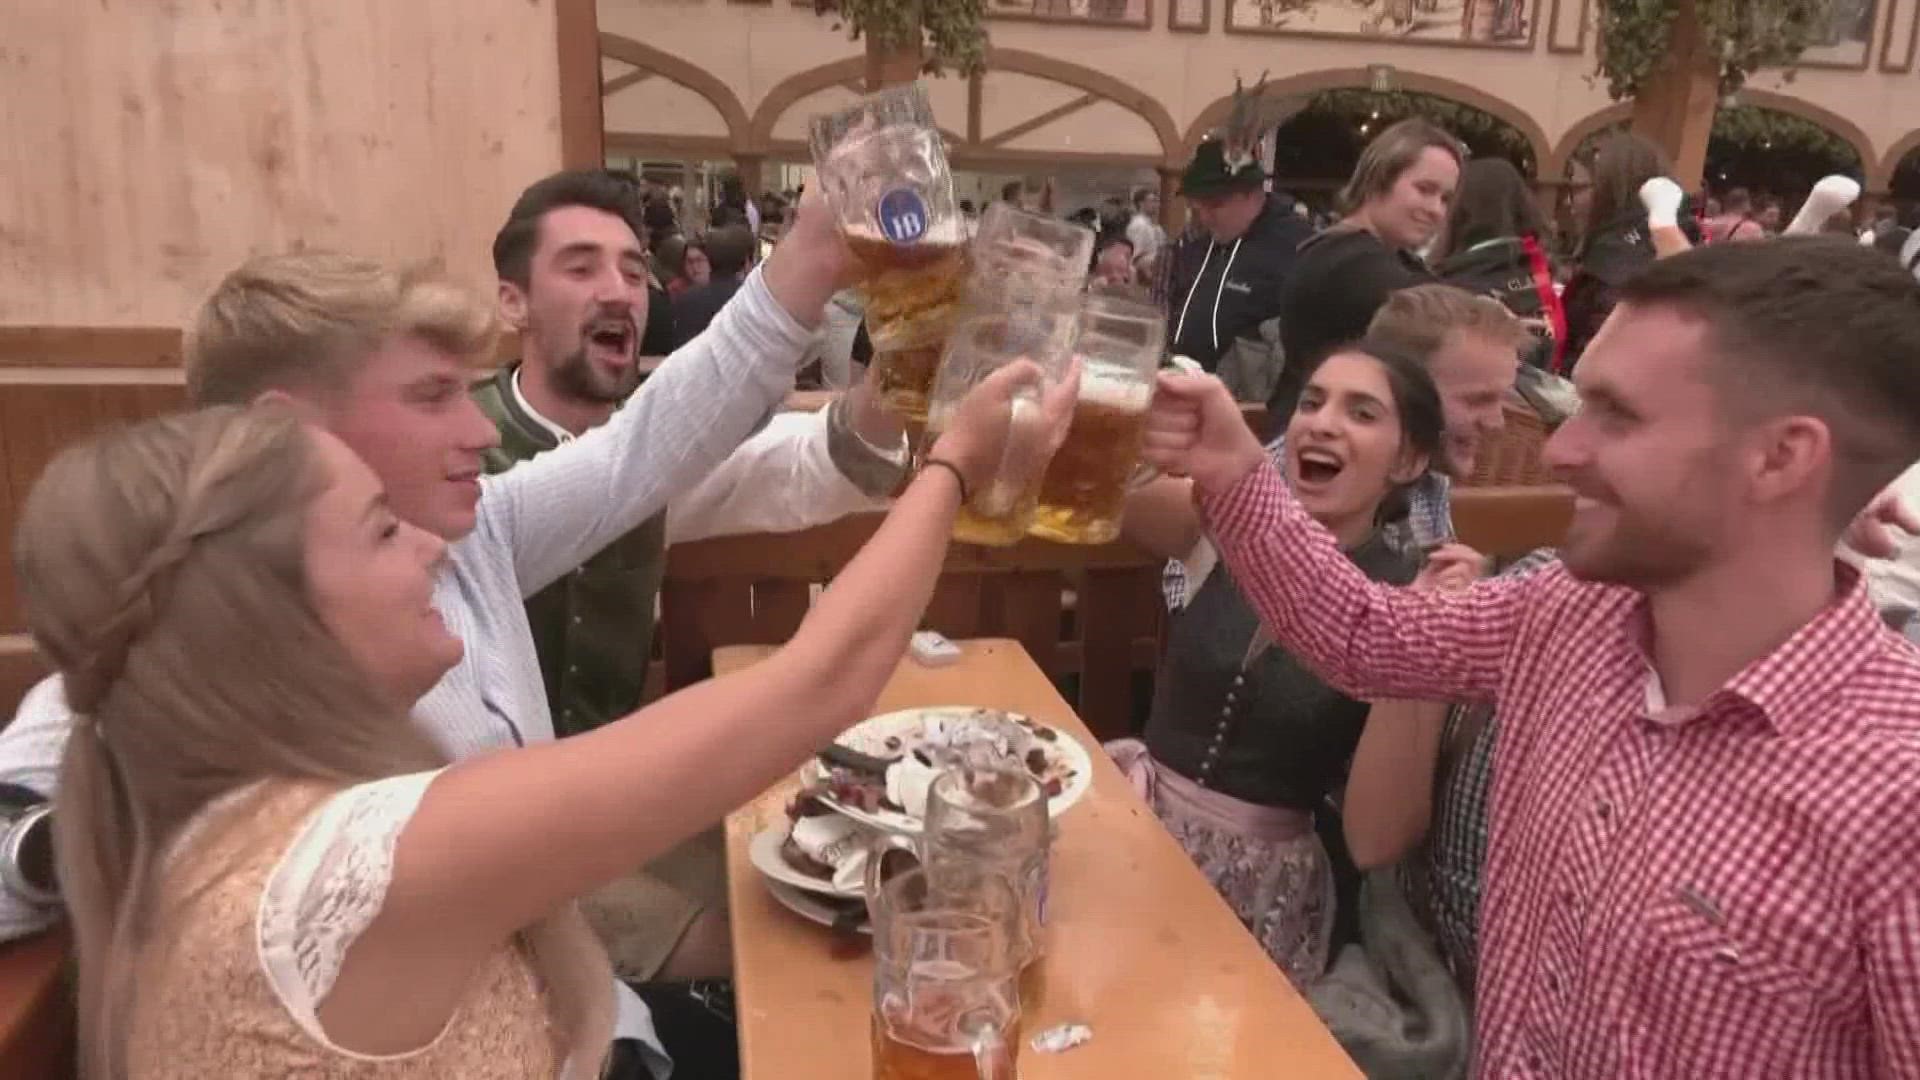 The 187th Oktoberfest is happening now in Munich, Germany after a 2-year break due to the pandemic.